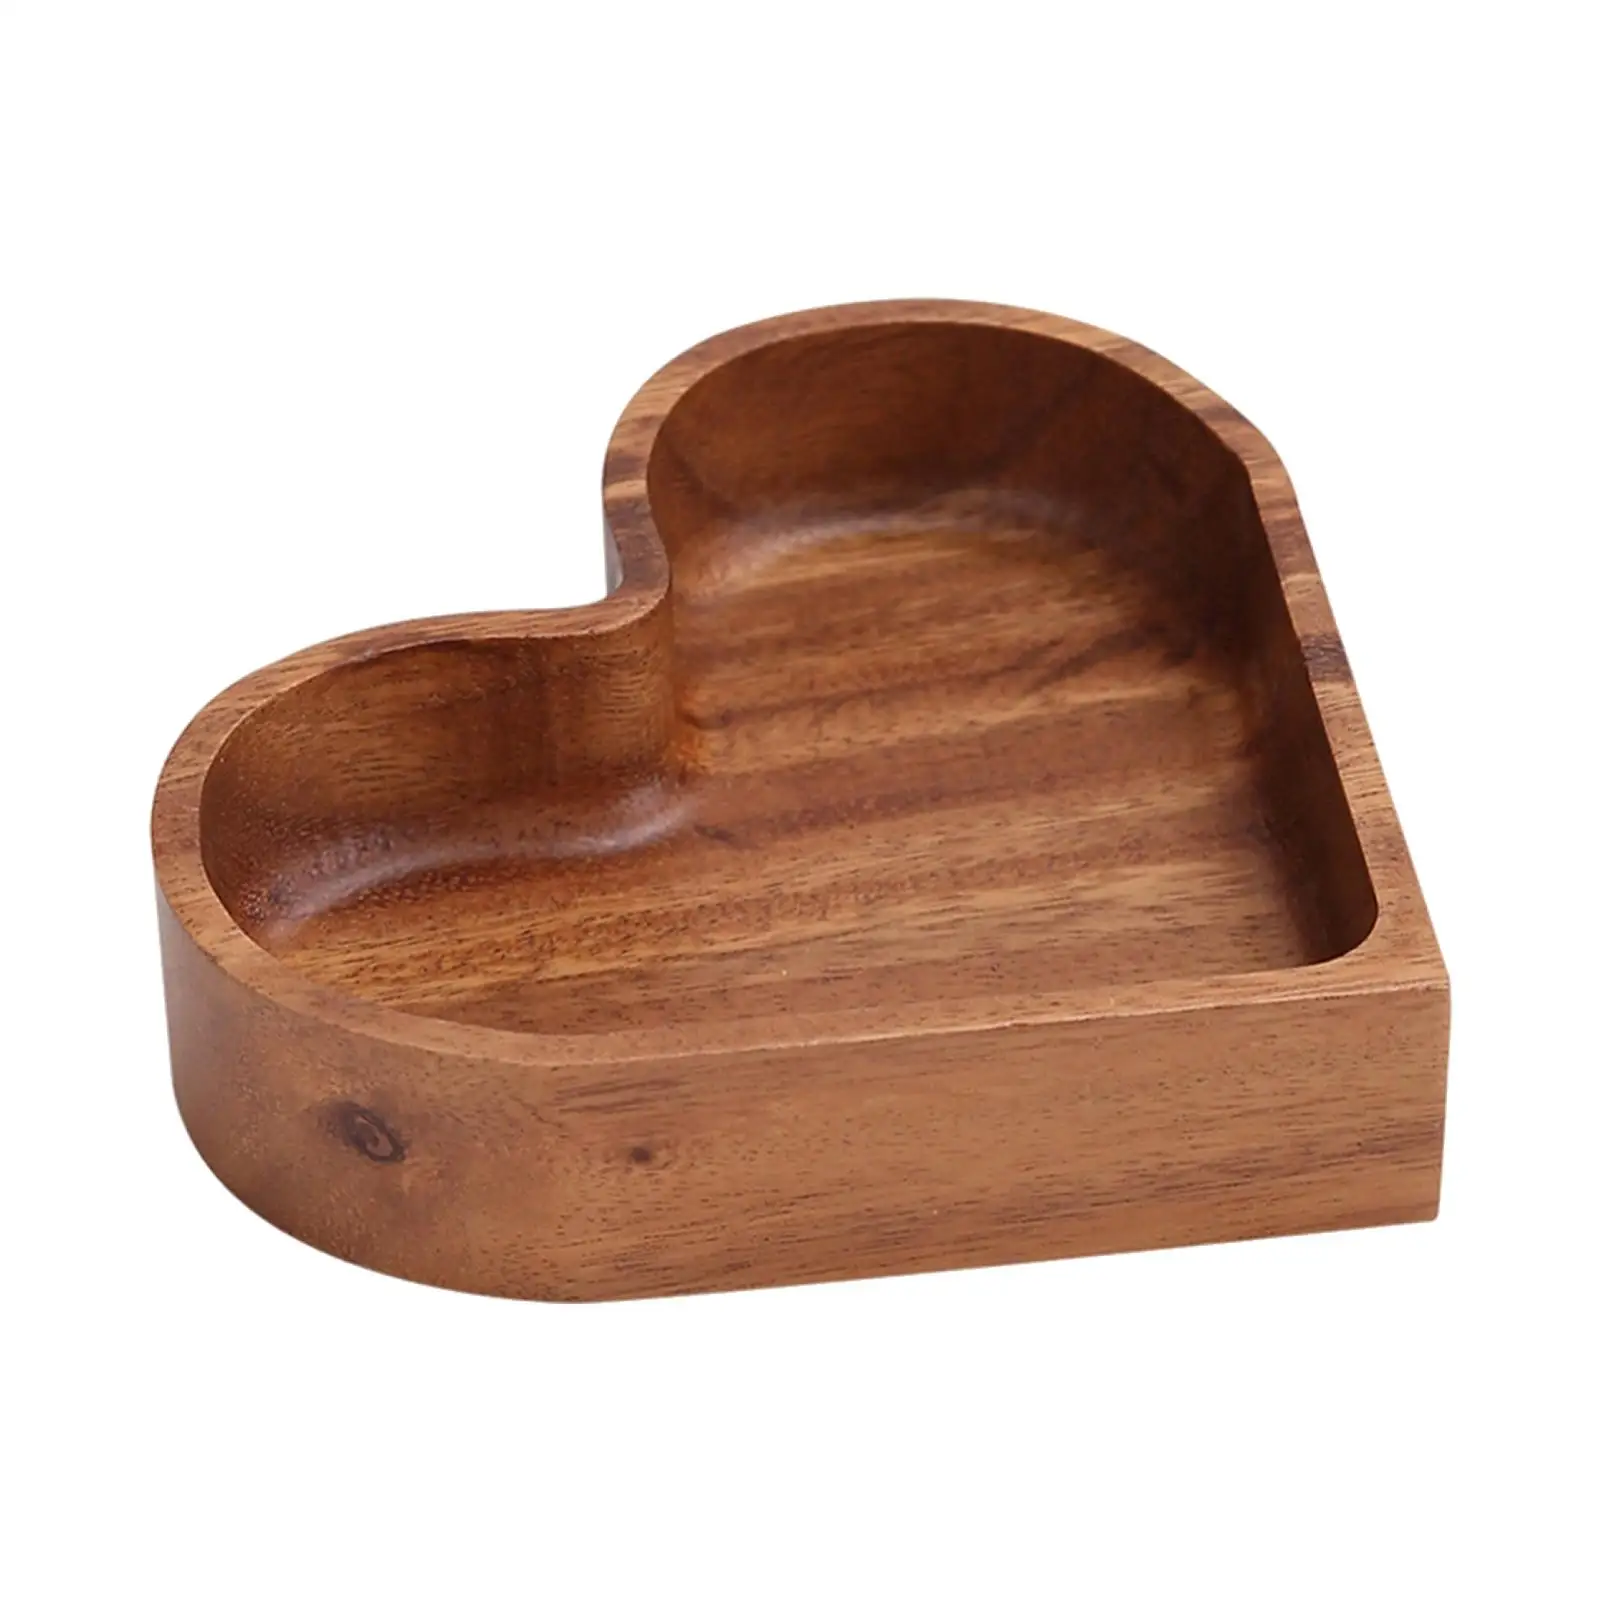 Wooden Serving Platters Tray Farmhouse Decor Breakfast Tray Organizer for Bathroom, Outdoors Multi Functional Heart Shaped Plate